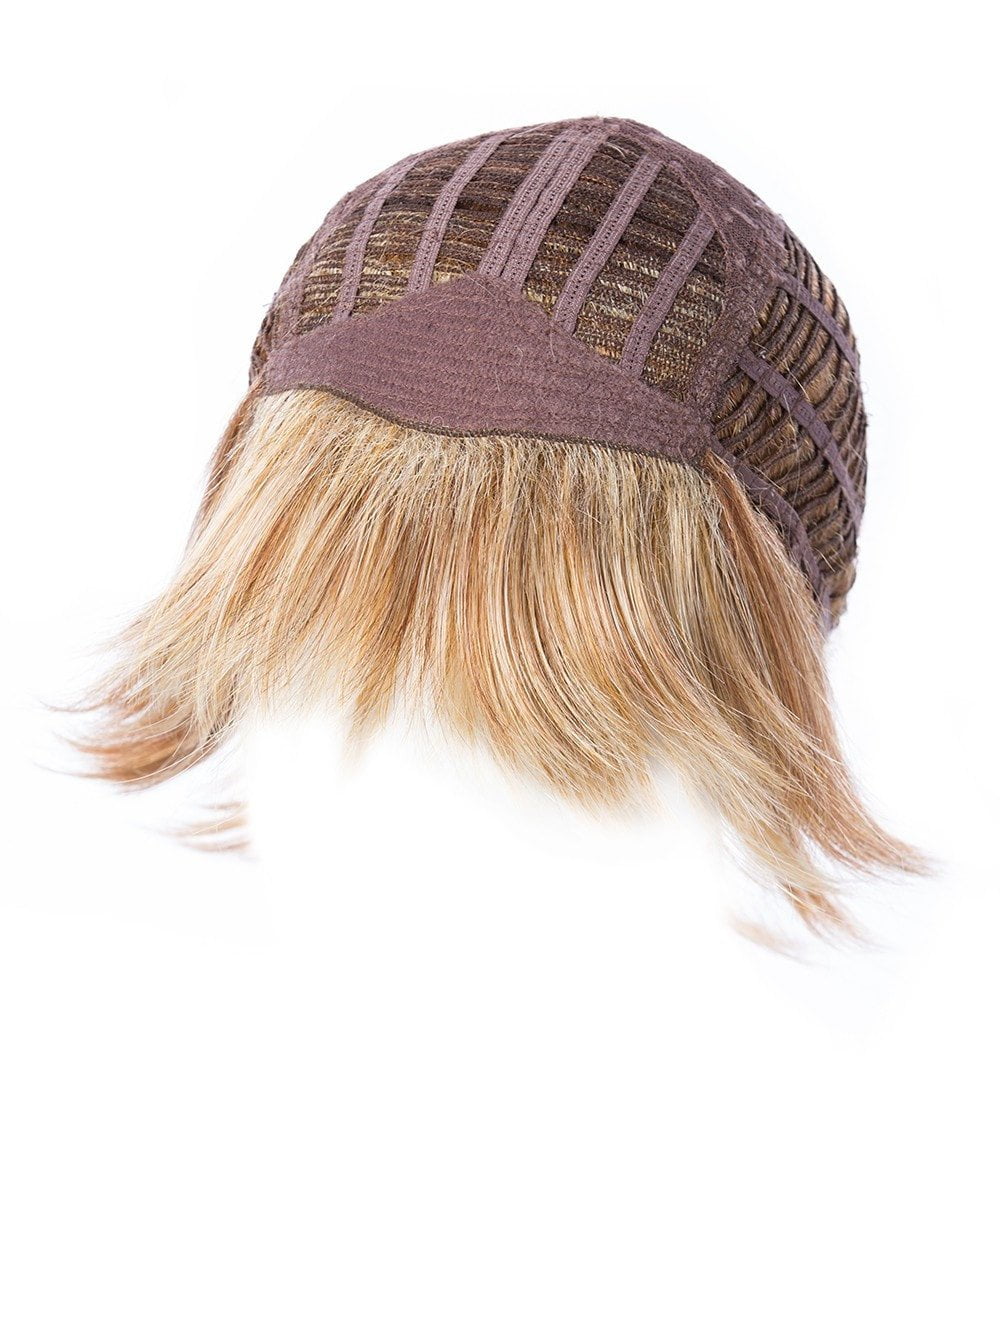 Basic Cap, also known as a capless or traditional construction, has open wefting 